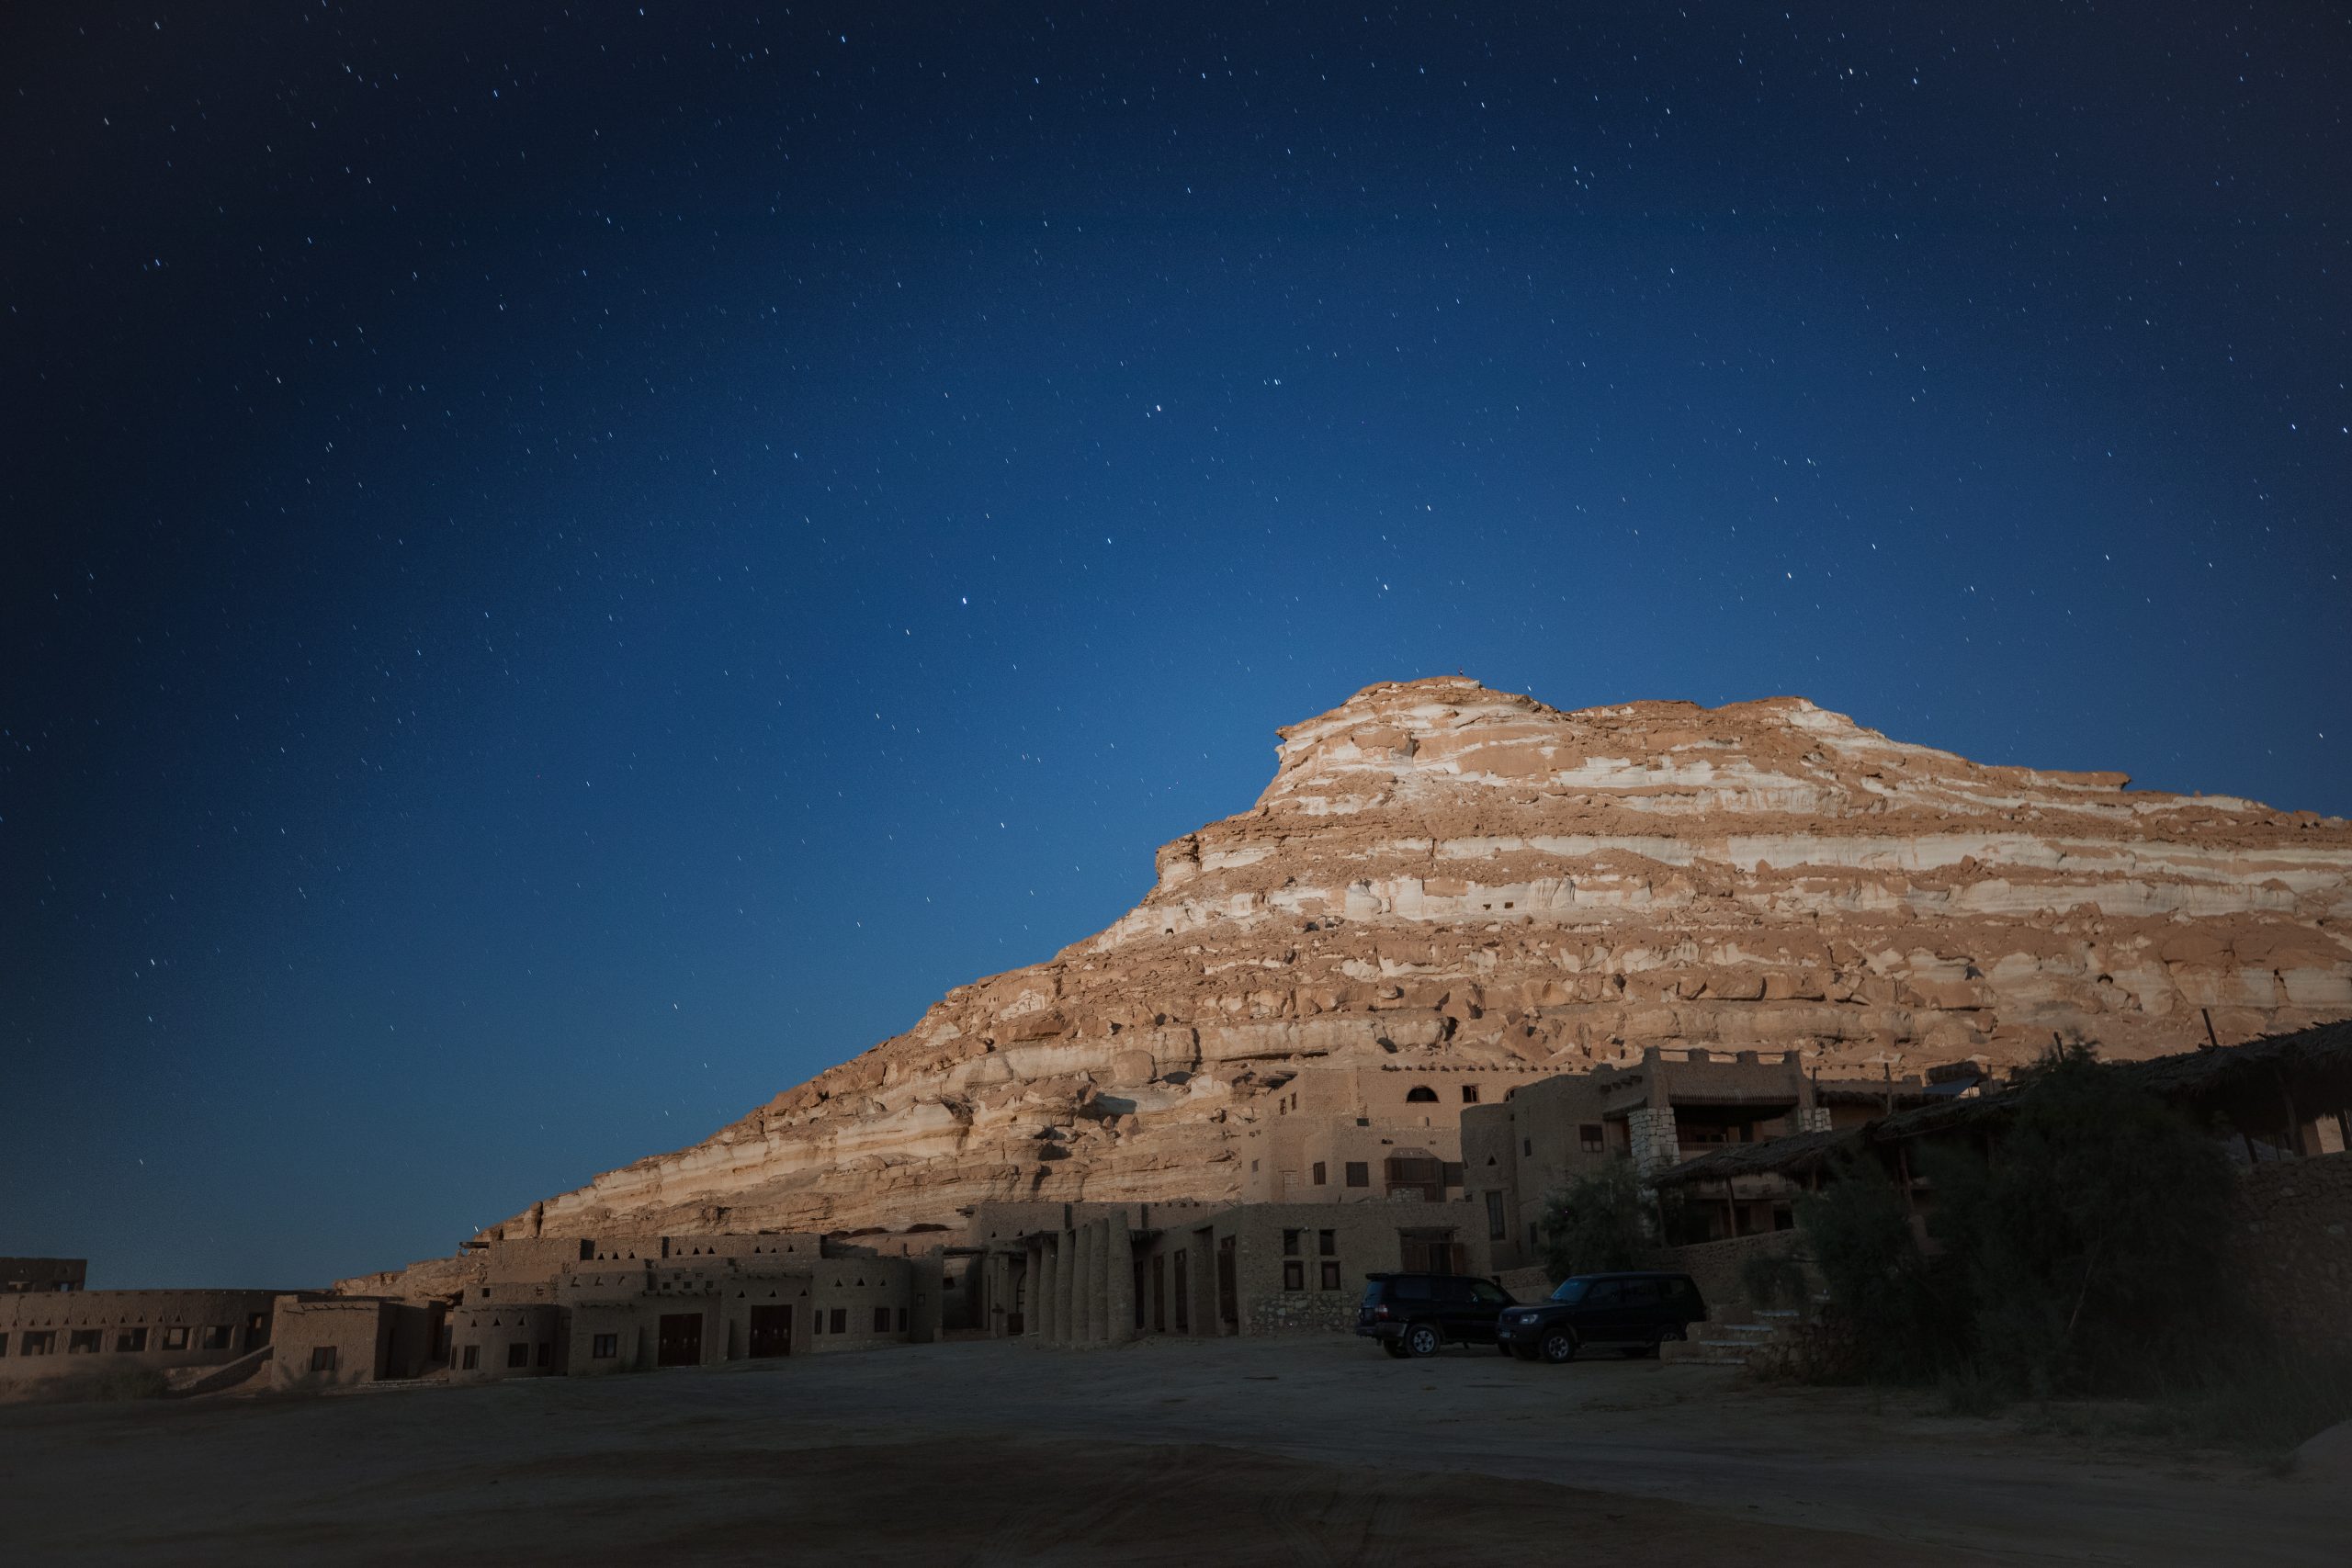 Taziry Ecolodge has been built at the footstep of the famous Red Mountain of Siwa (Taziry), facing the magnificent White Mountain (Gafar), overlooking the vast salt lake, and the timeless dunes of the Great Sand Sea. “Taziry” in Siwi means “full moon”.